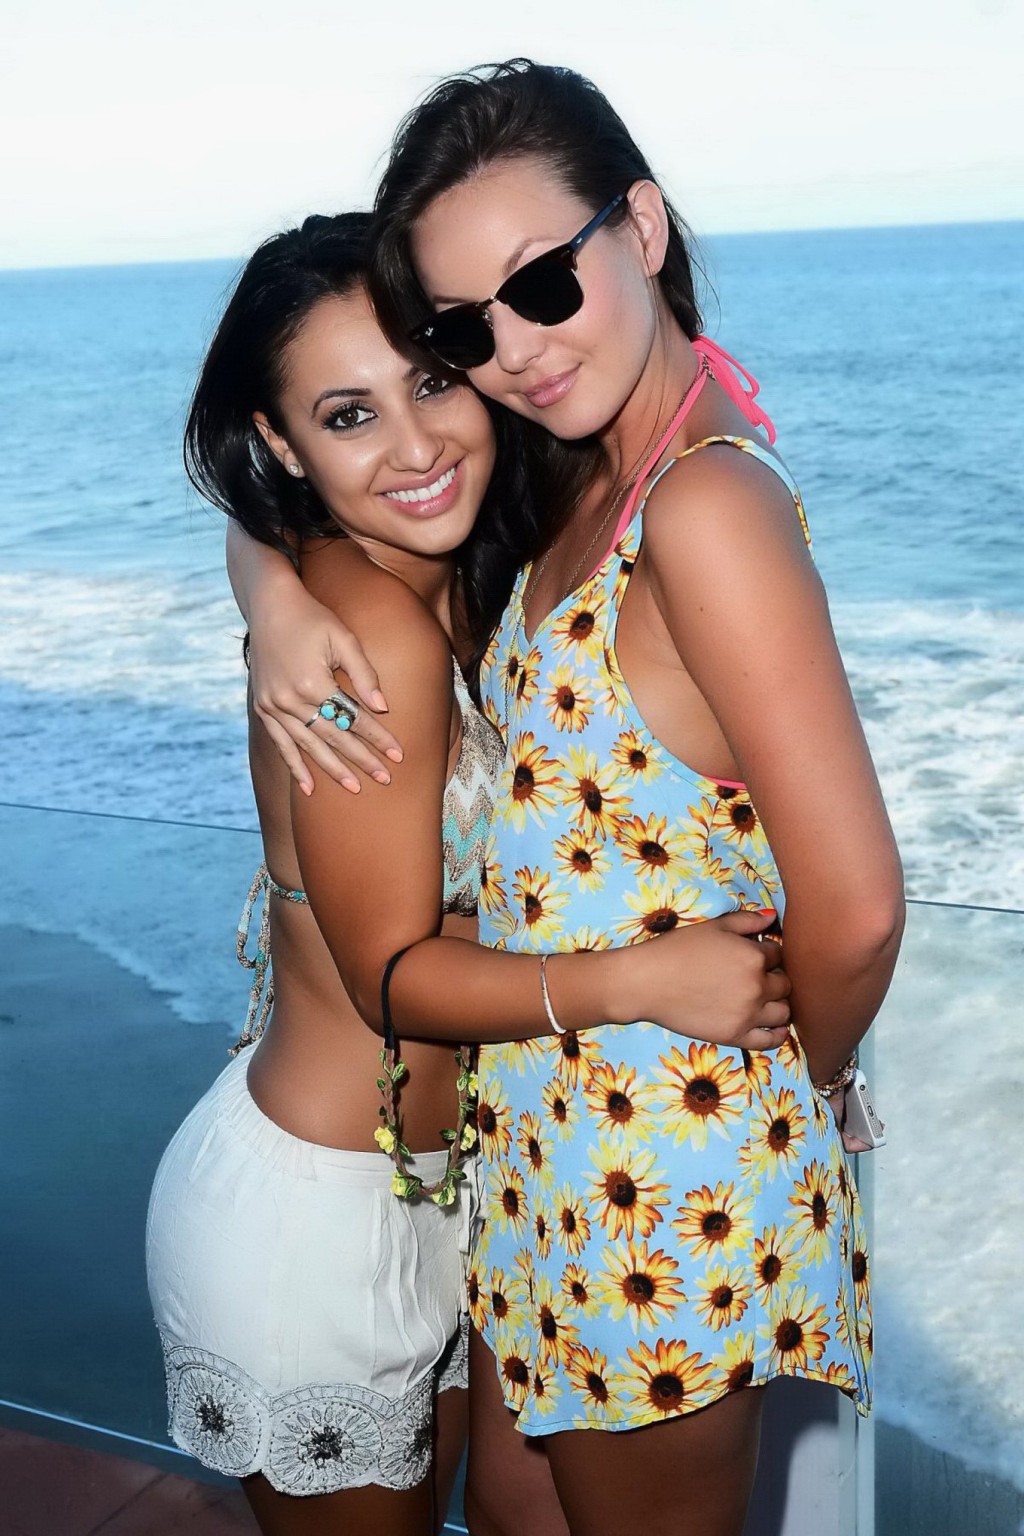 Francia Raisa busty in a colorful bikini top and shorts at her birthday party in #75189288